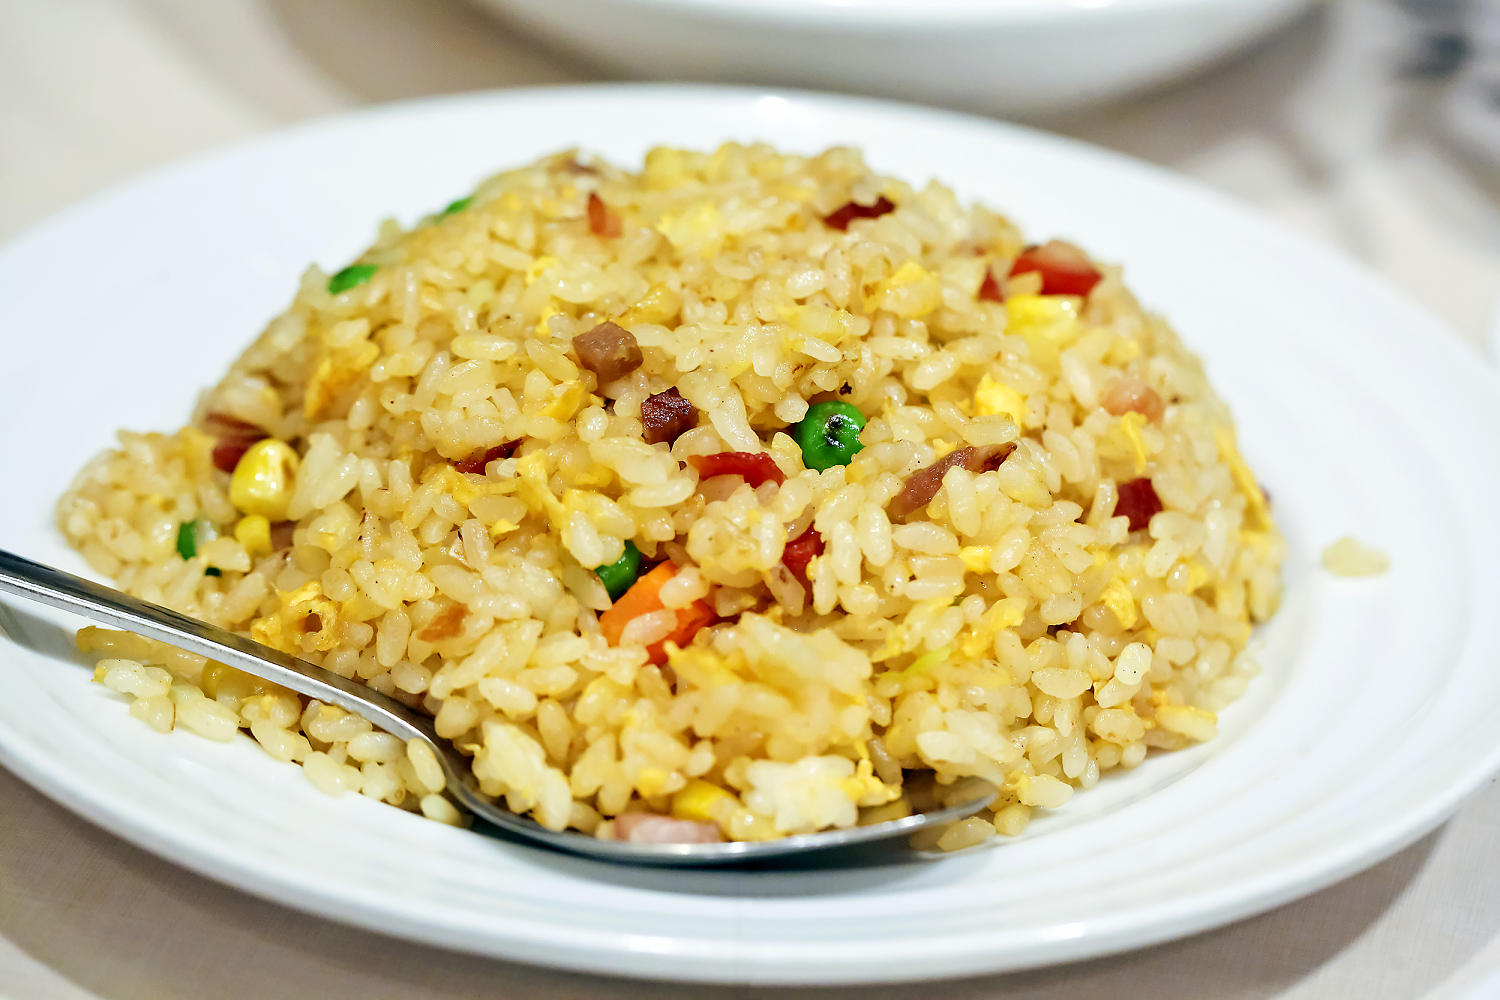 'Fried rice syndrome' is going viral after a 20-year-old student died. What is it?